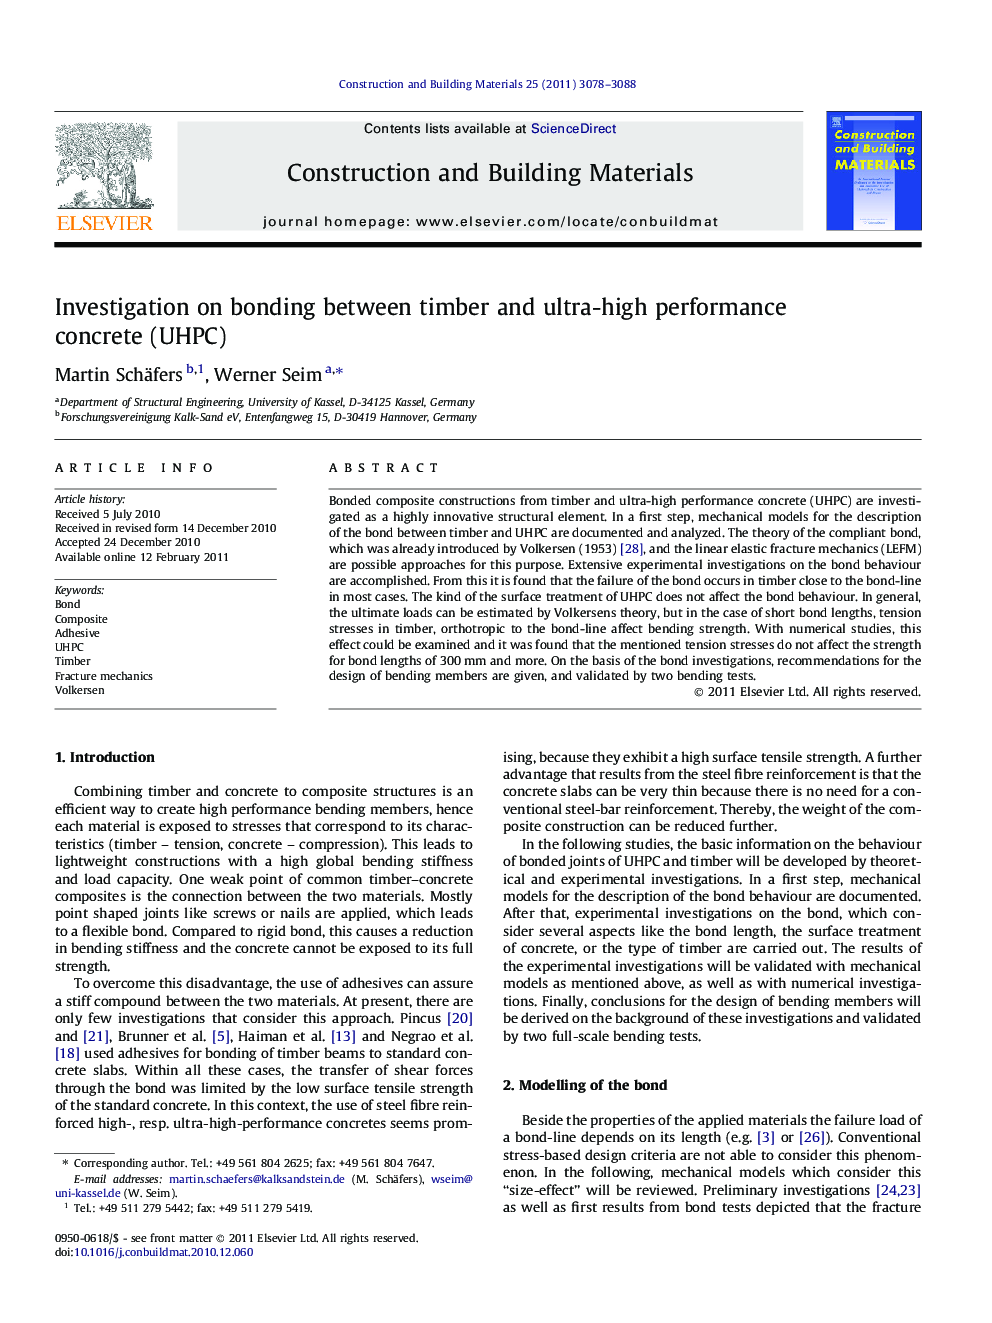 Investigation on bonding between timber and ultra-high performance concrete (UHPC)